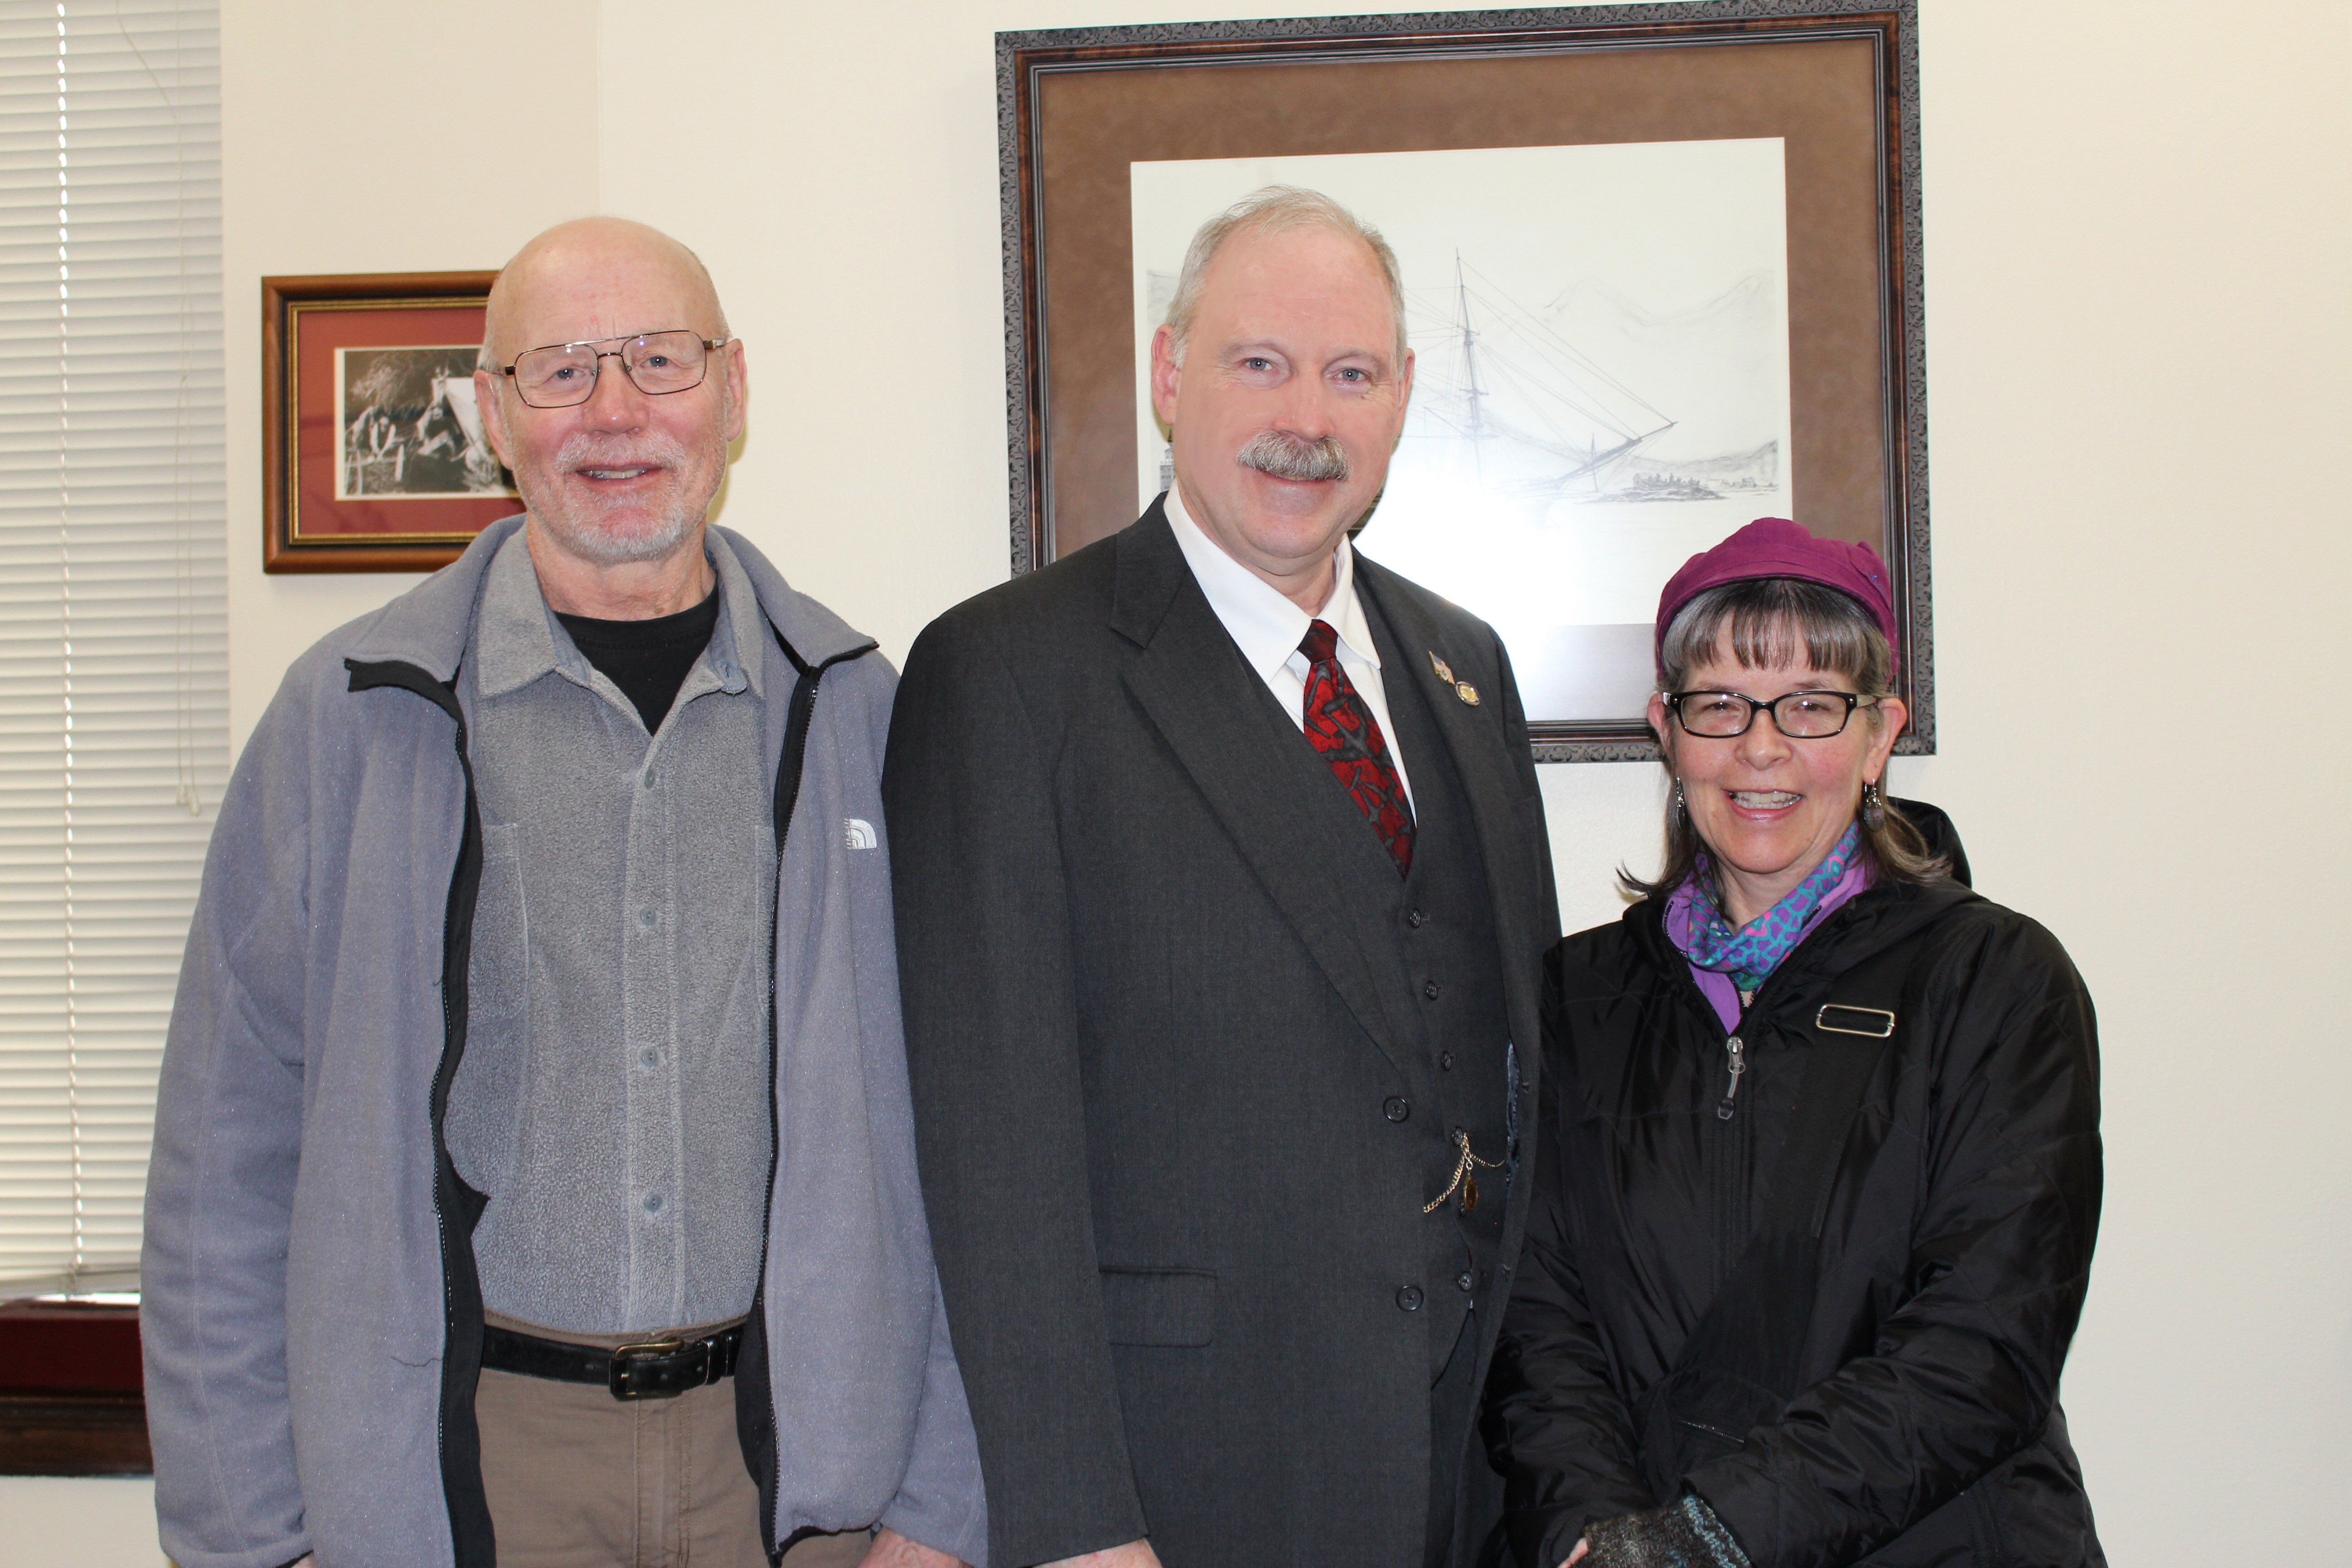 Senator Stedman pictured here with Rick and cousin Jill Williams who were visiting from Petersburg.